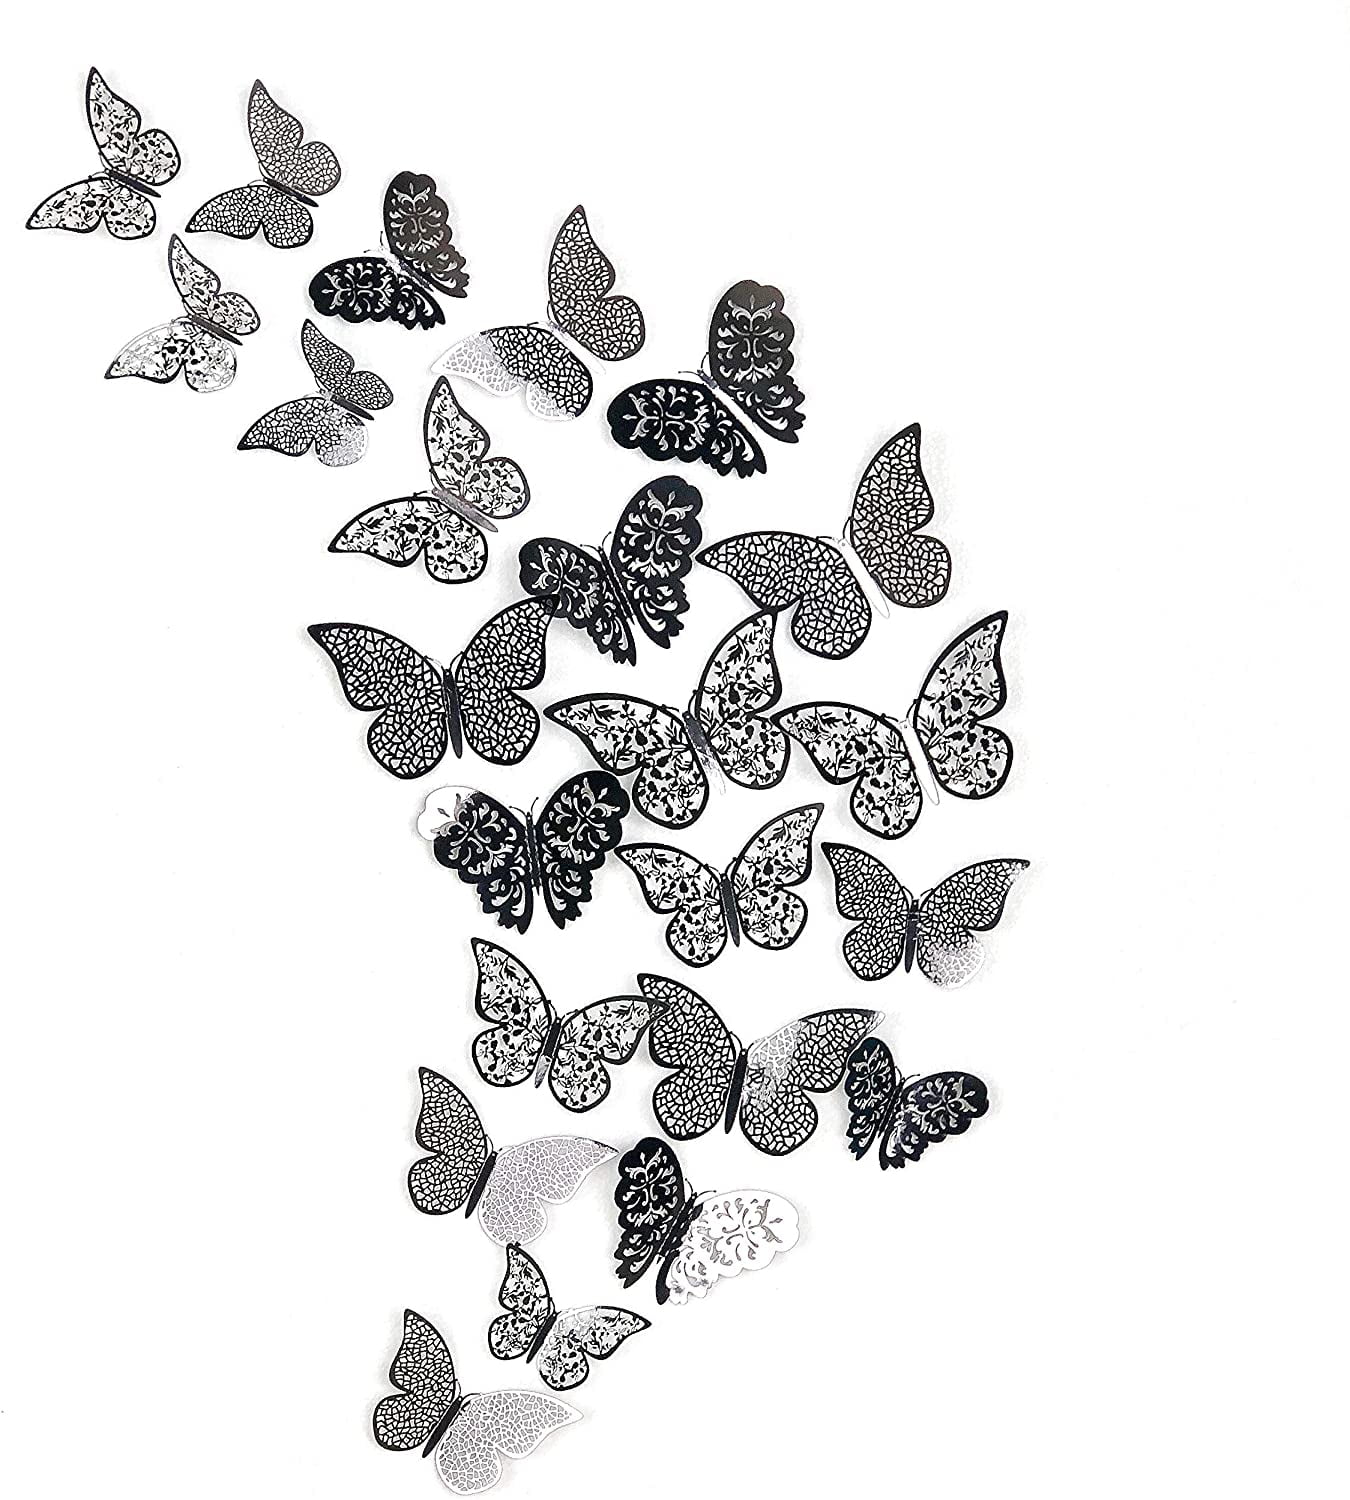 24pcs 3 Sizes 3D Butterfly Wall Stickers Butterfly Wall Decor Decal Removable Mural for Bedroom Living Room Nursery Classroom Offices Wedding Party Cake Decoration Gold 3D Butterfly Wall Decals 